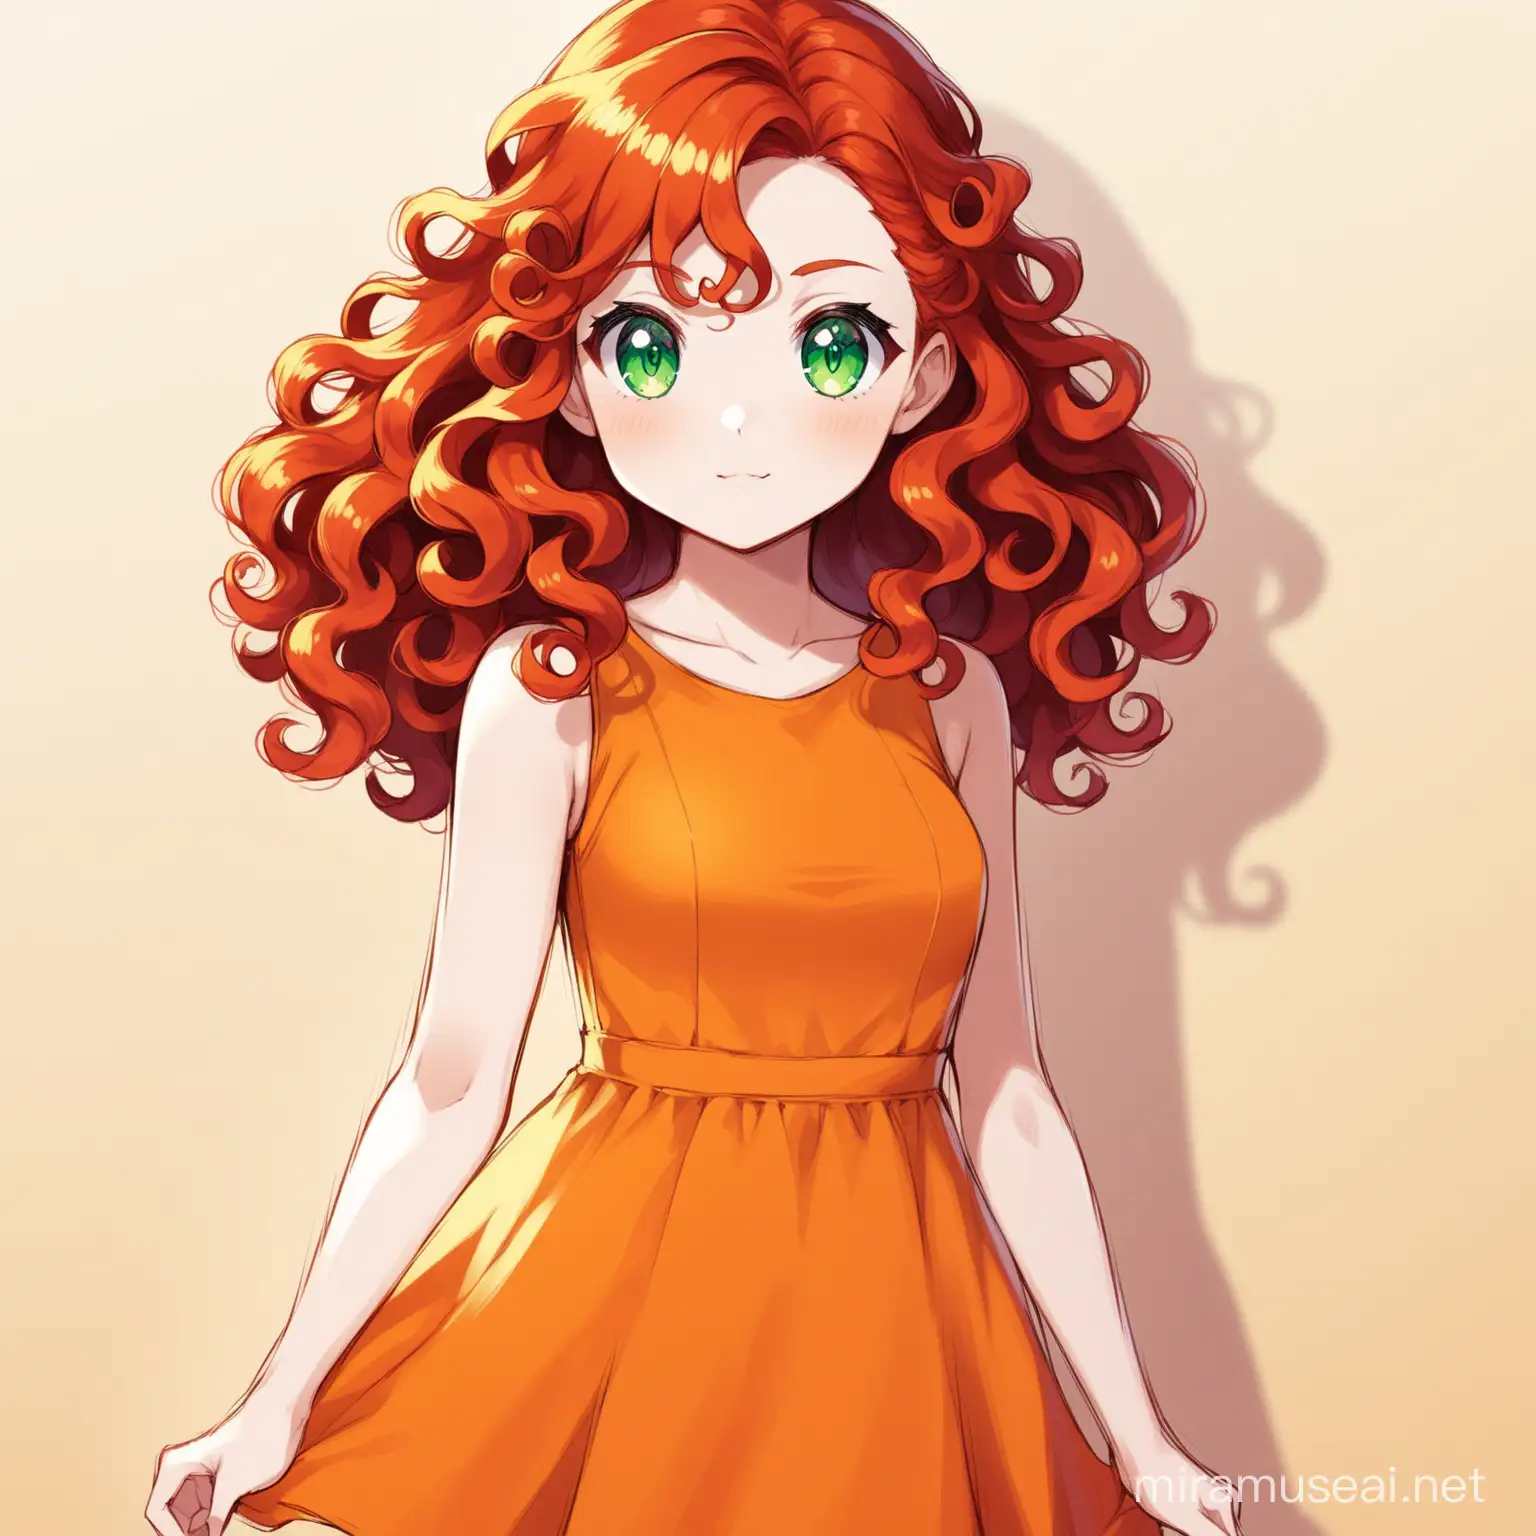 Red CurlyHaired Young Girl in PokemonInspired Orange Dress with Green Eyes